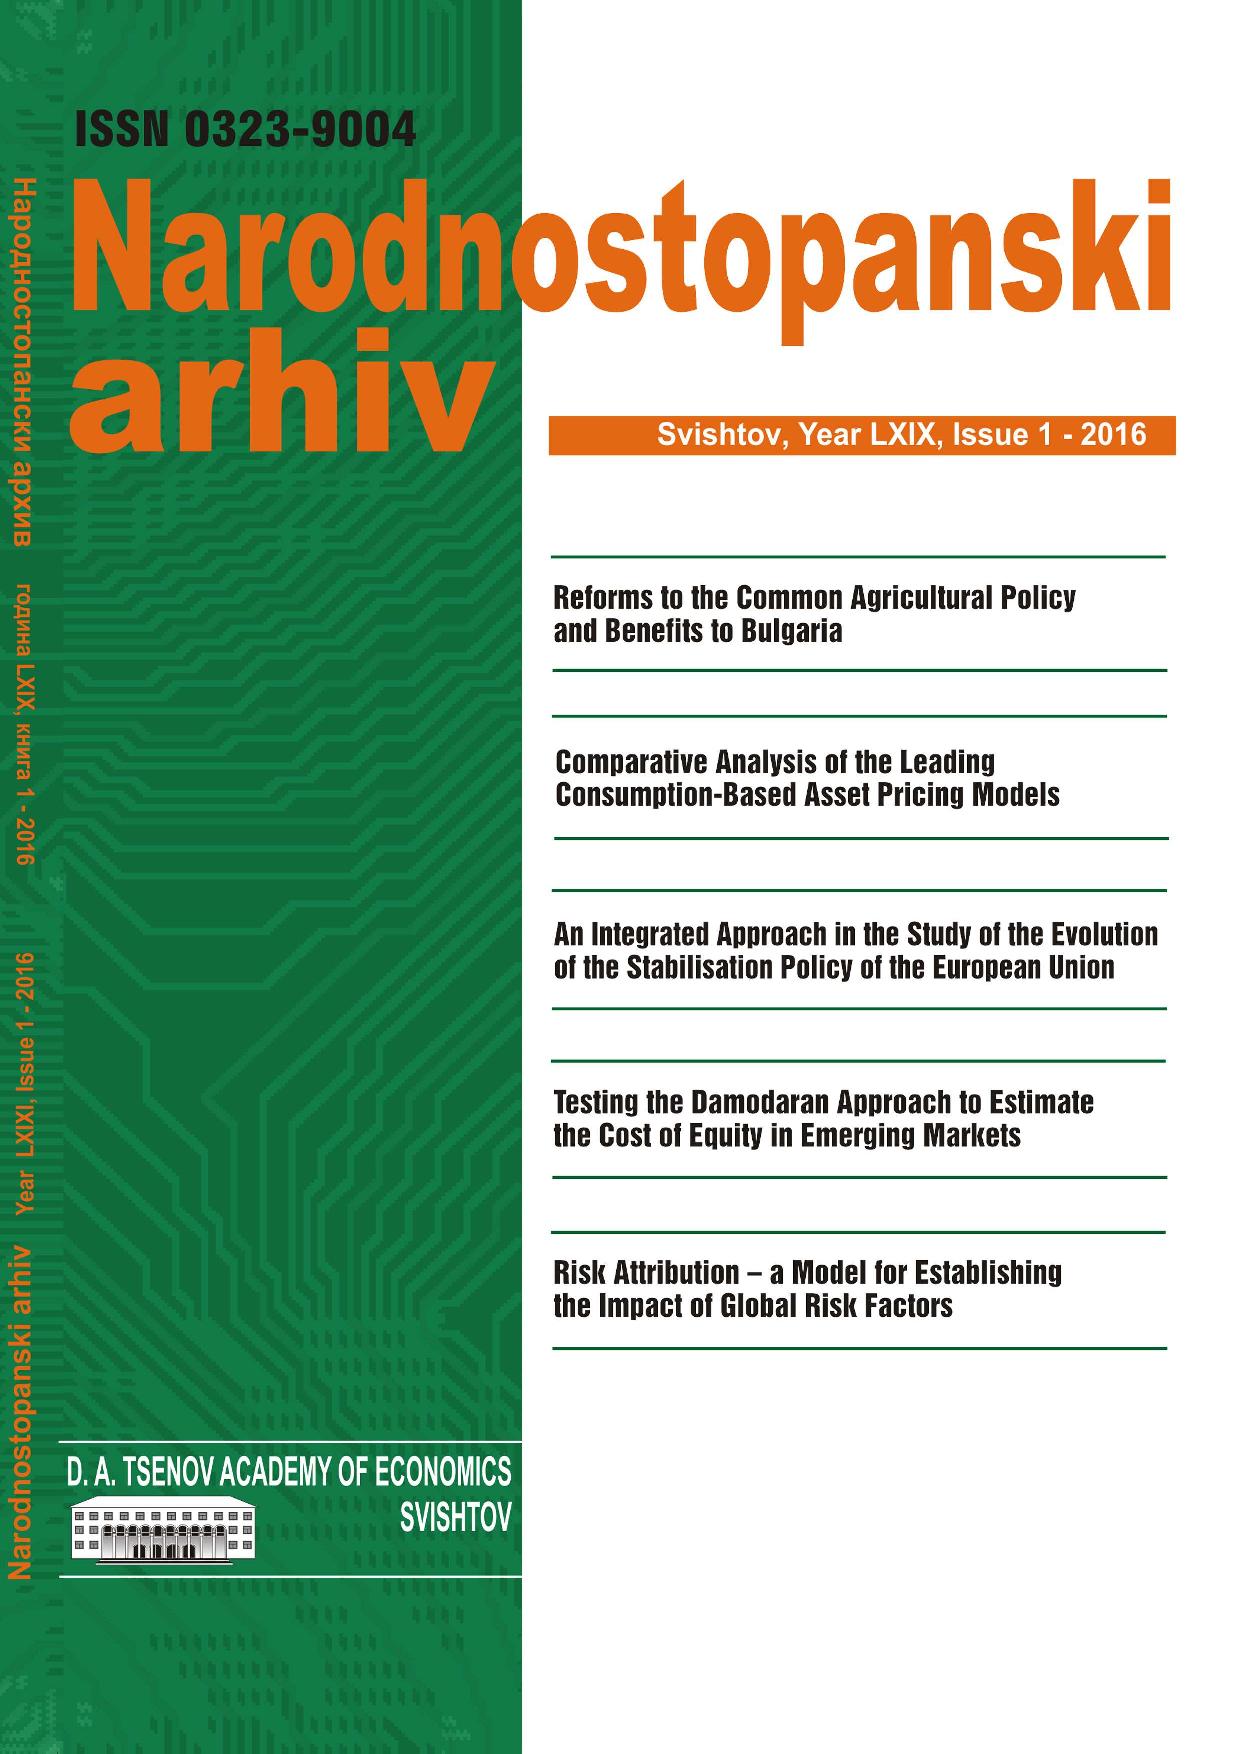 AN INTEGRATED APPROACH IN THE STUDY OF THE EVOLUTION OF THE STABILISATION POLICY OF THE EUROPEAN UNION Cover Image